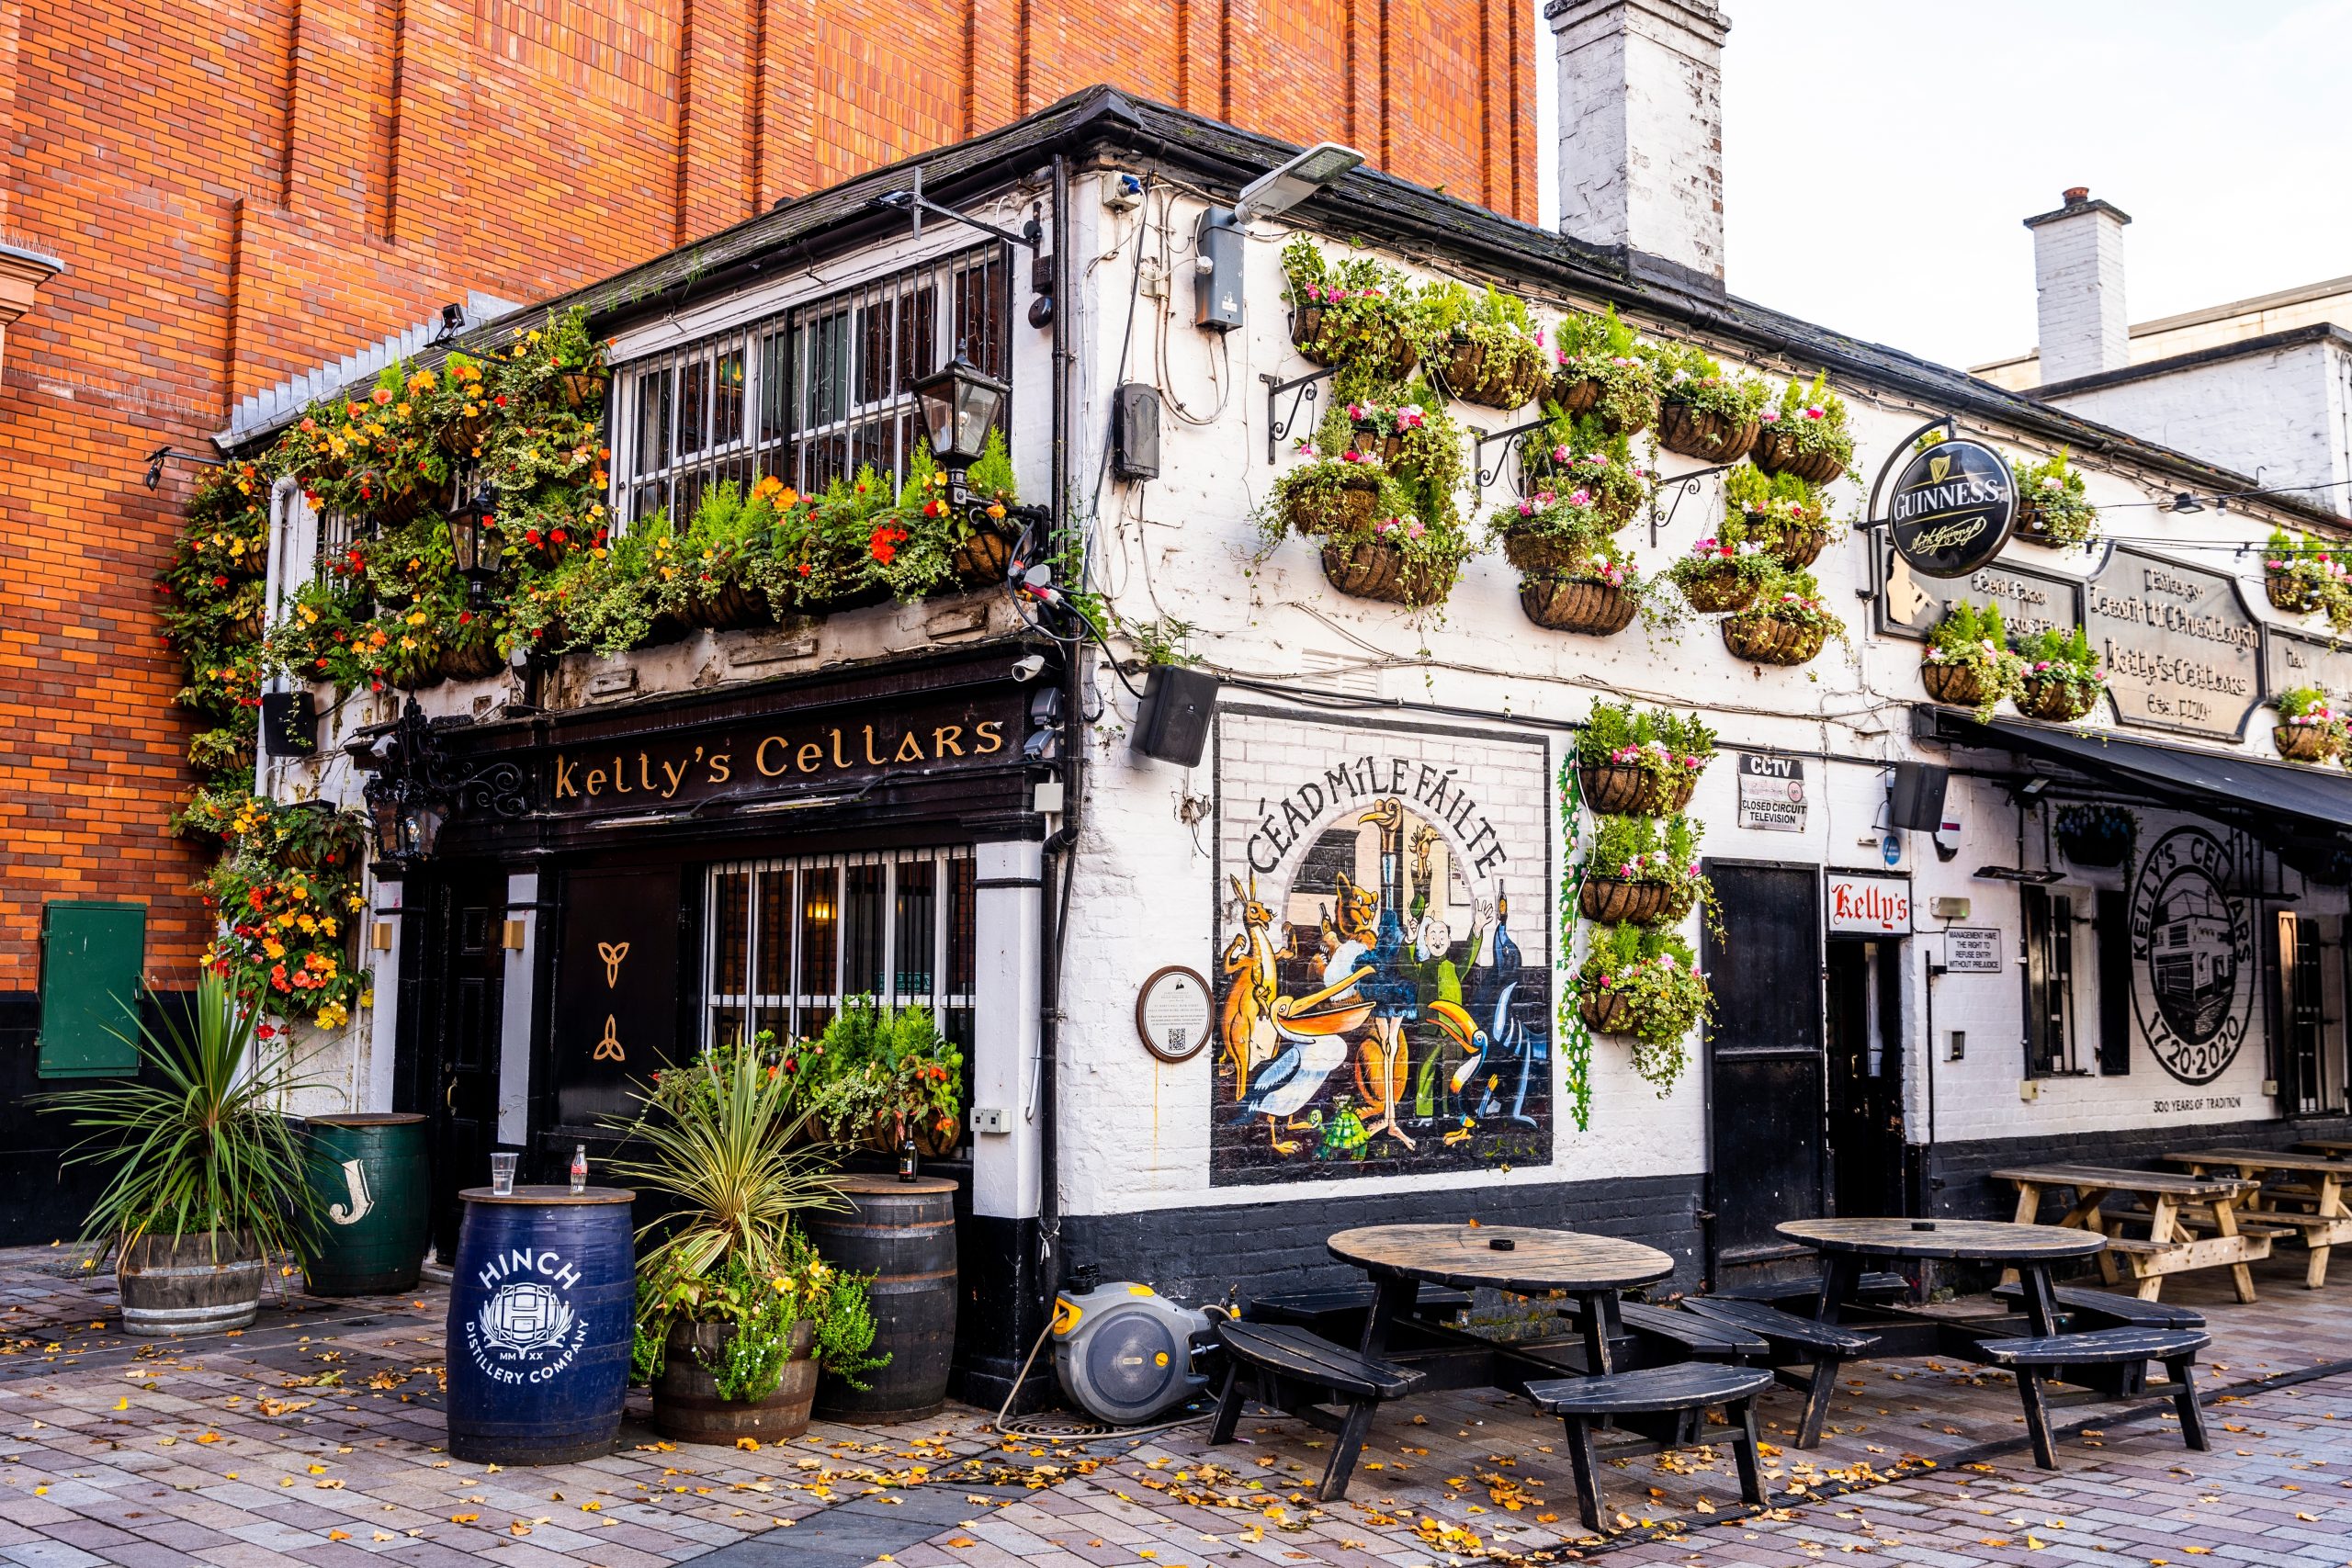 Historic Kelly’s Cellars sold in £5m deal